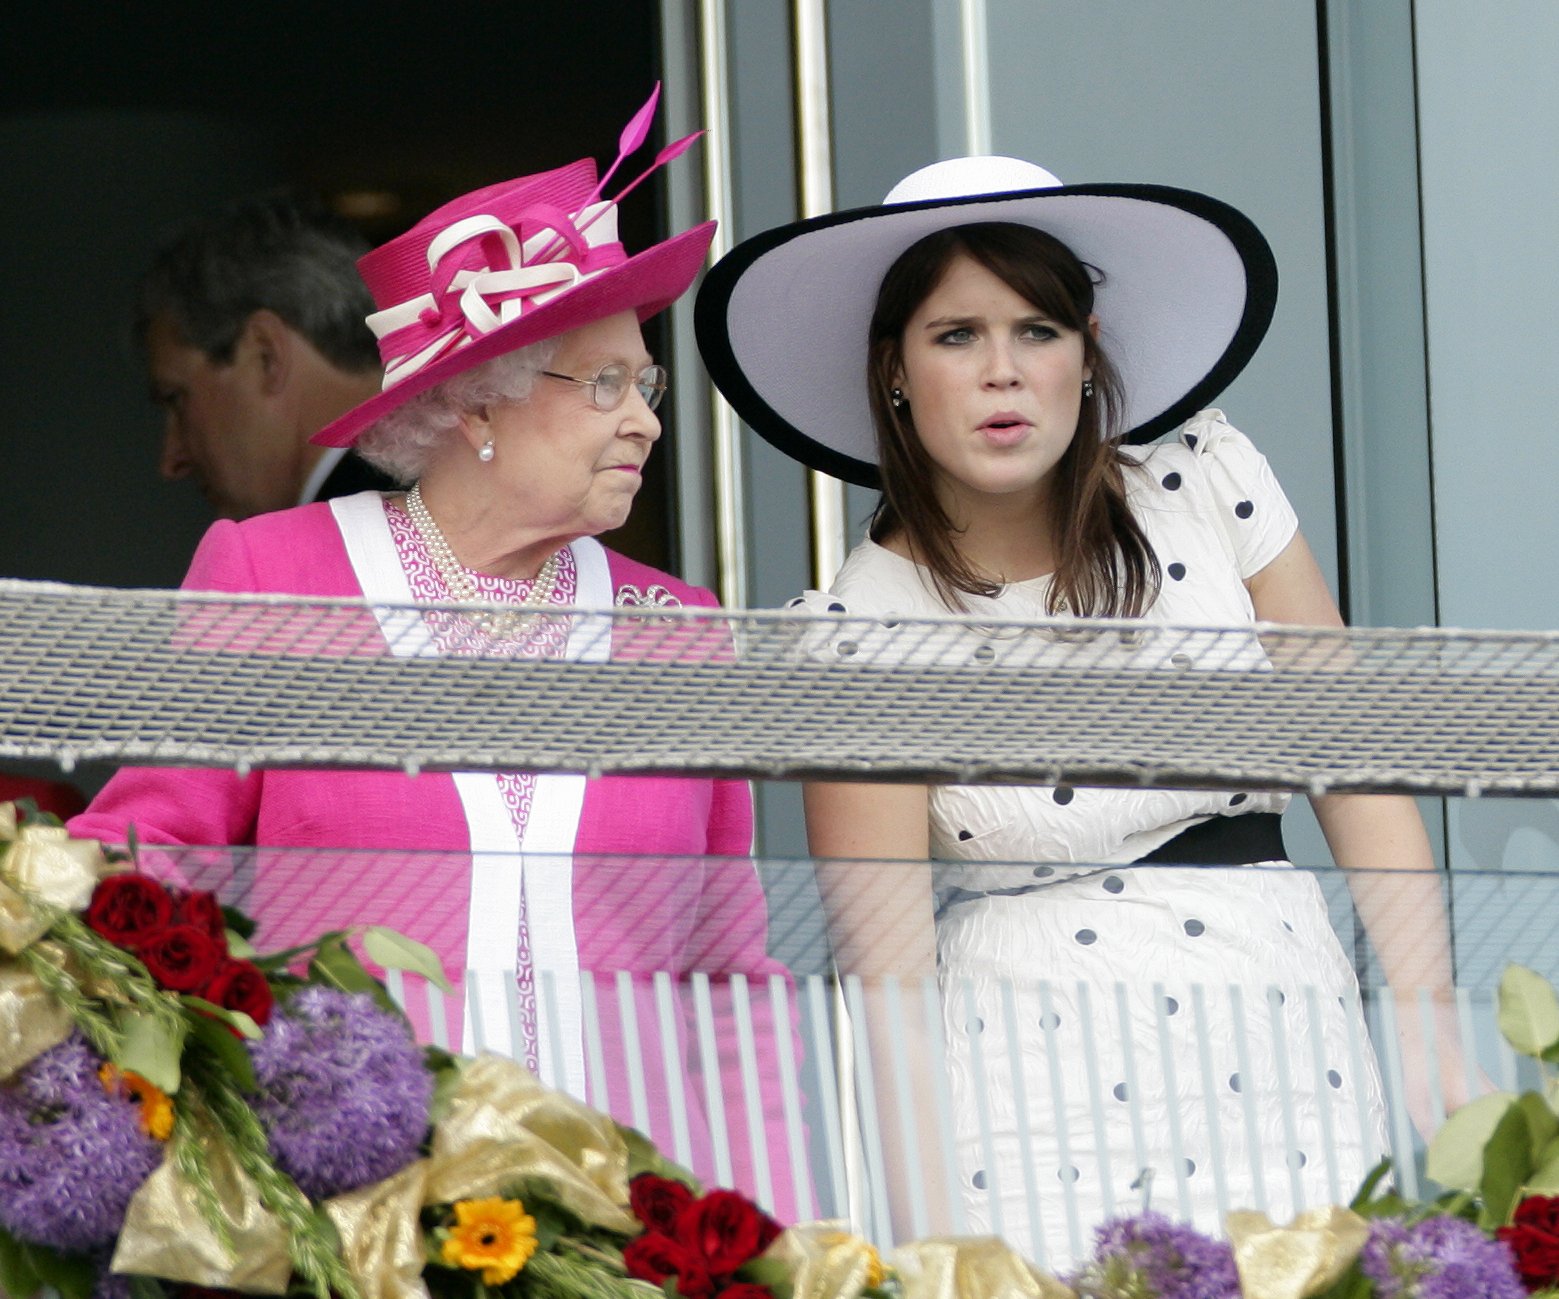 Queen Elizabeth II and Princess Eugenie on the balcony of the Royal Box while attending  Derby Day at the Investec Derby Festival on June 4, 2011, in Epsom, England | Source: Getty Images